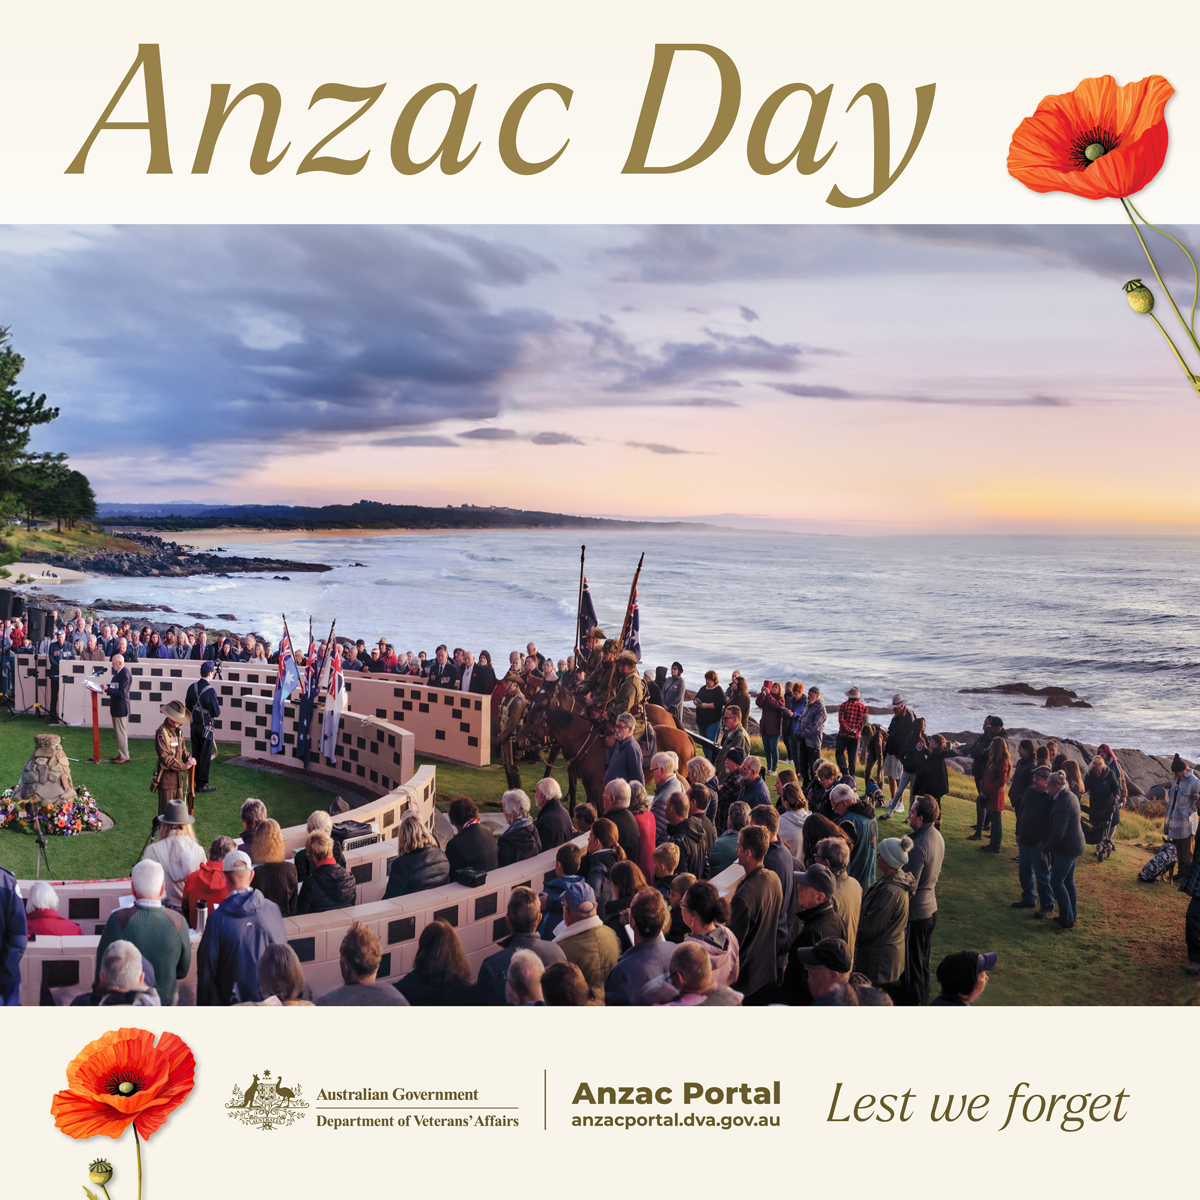 This #AnzacDay, we reflect, honour & remember our 🇦🇺& 🇳🇿 servicemen & servicewomen. Their loyalty, selflessness & courage are a part of Australia's national identity. They are invaluable partners in delivering humanitarian assistance & peacekeeping operations. #LestWeForget